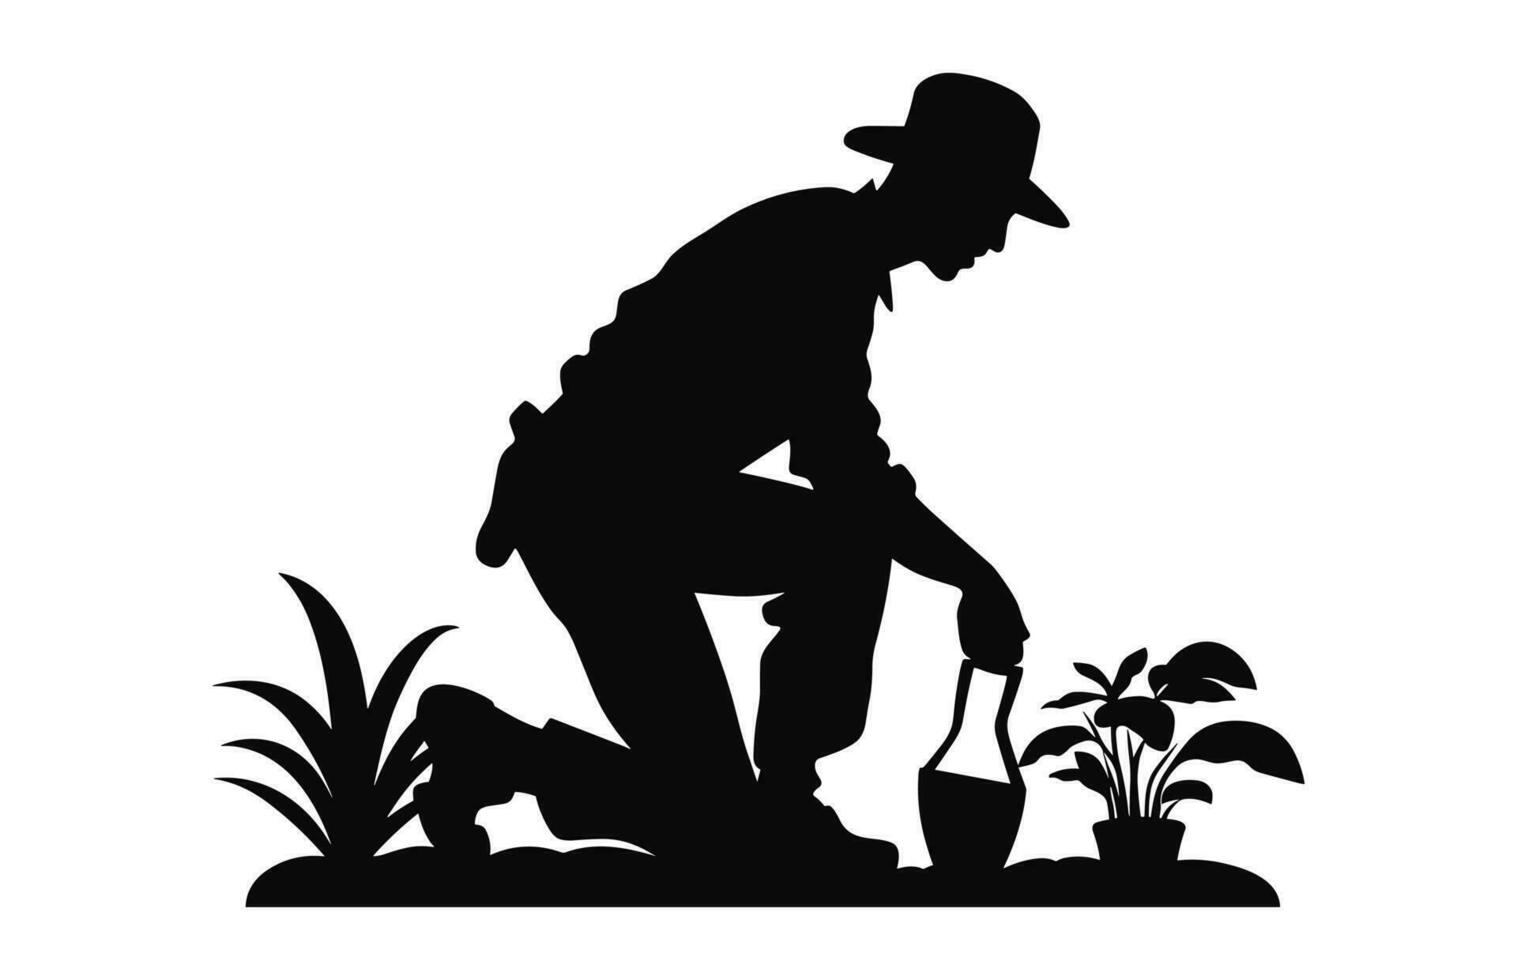 A Gardening Silhouette black vector isolated on a white background